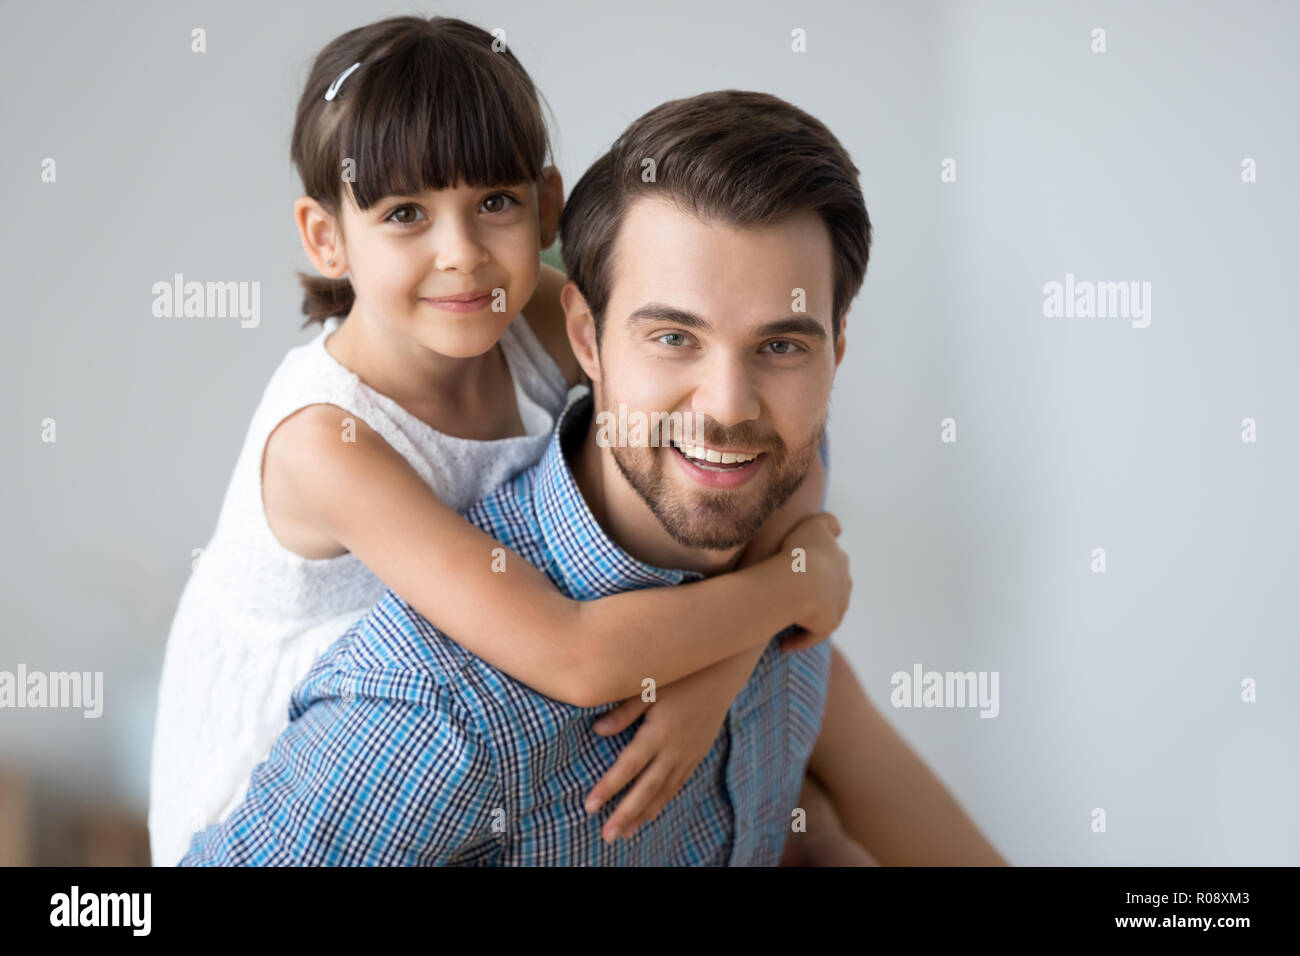 Head shot portrait daughter and father indoors Stock Photo